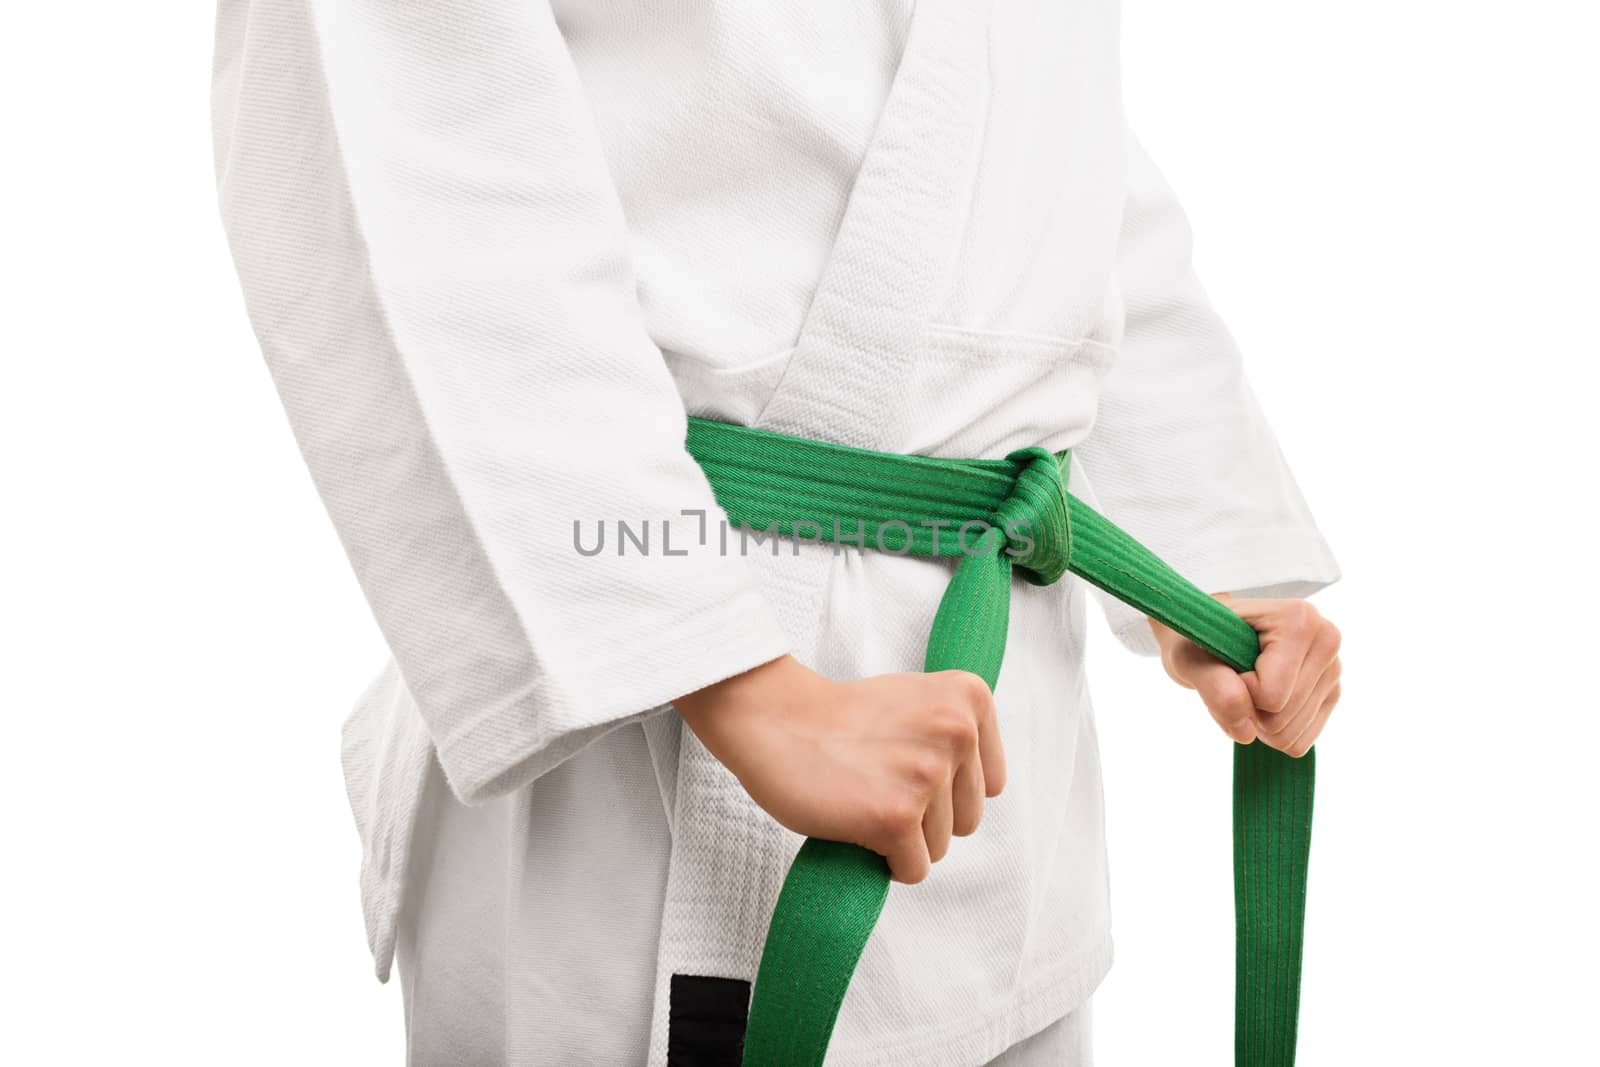 Preparing for training. Close up shot of the mid section of a girl in kimono, tying her green belt, isolated on white background.